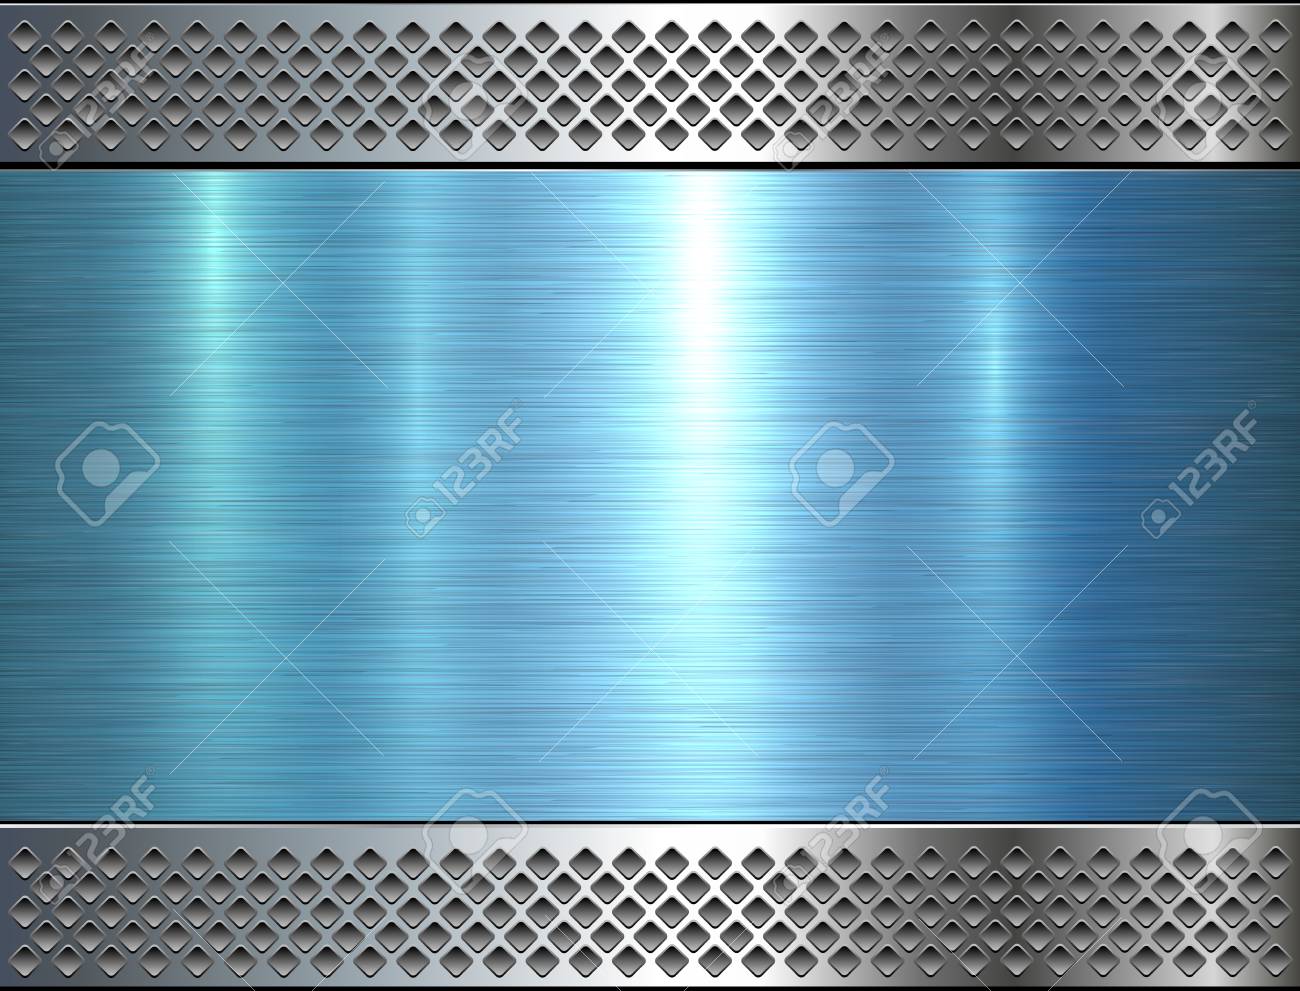 Metallic Background Blue Metal Perforated Texture Polished